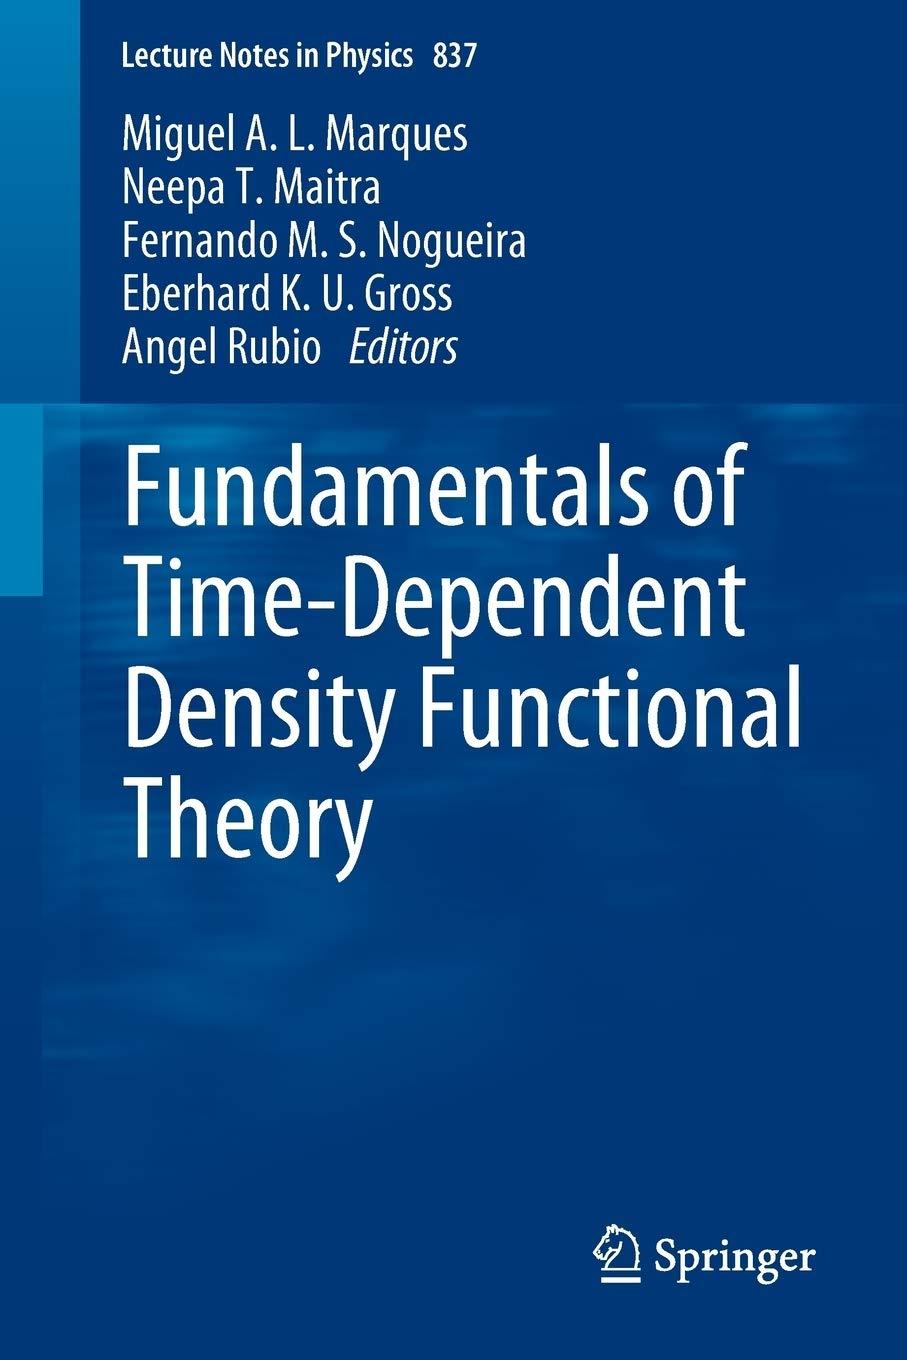 fundamentals of time dependent density functional theory 1st edition miguel a.l. marques, neepa t. maitra,